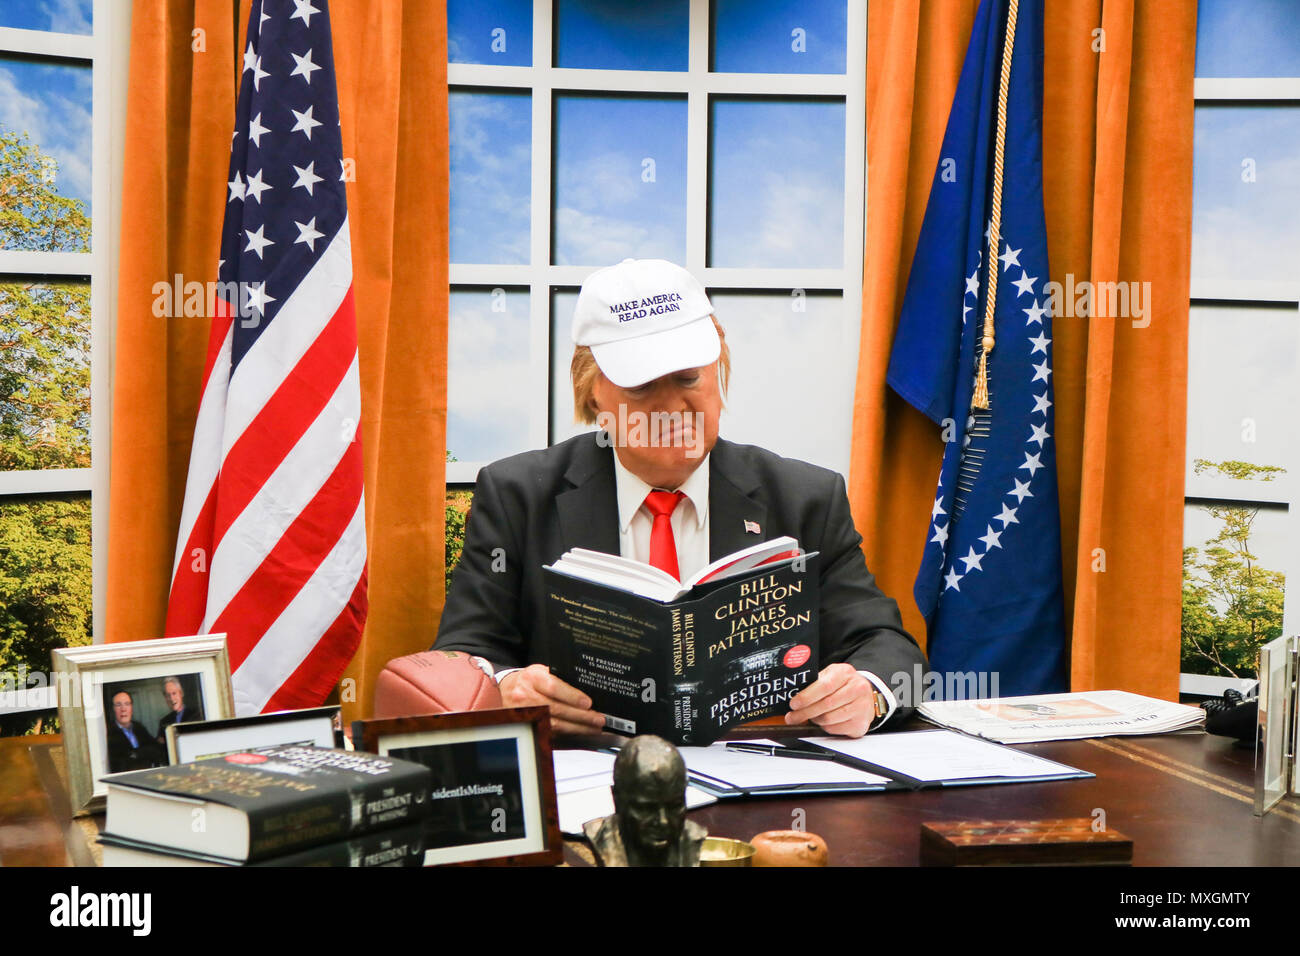 London UK. 4th June 2018. A Donald Trump impersonator sits behind a replica  Oval Office at a book launch at Waterloo Station to promote 'The President is Missing', a novel by Bill Clinton co written with James Patterson Credit: amer ghazzal/Alamy Live News Stock Photo